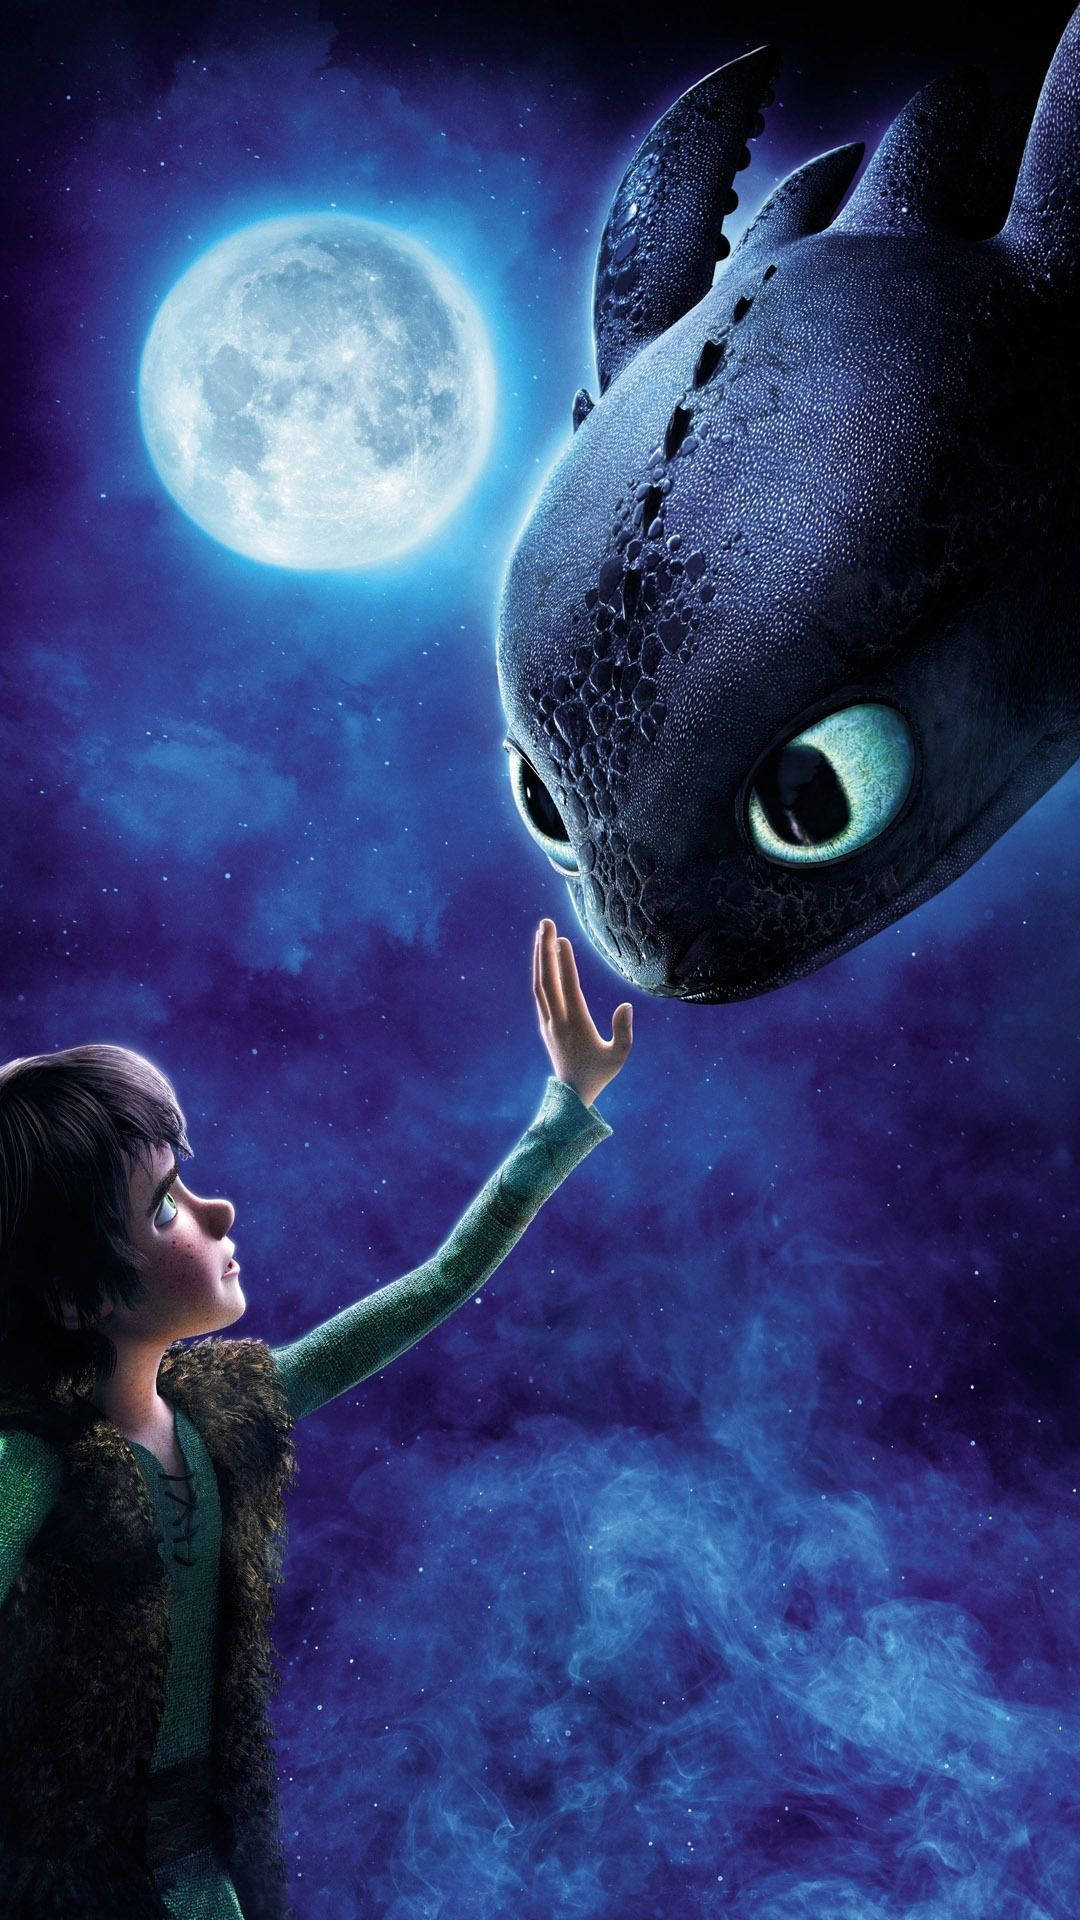 How To Train Your Dragon Toothless And Hiccup Wallpaper